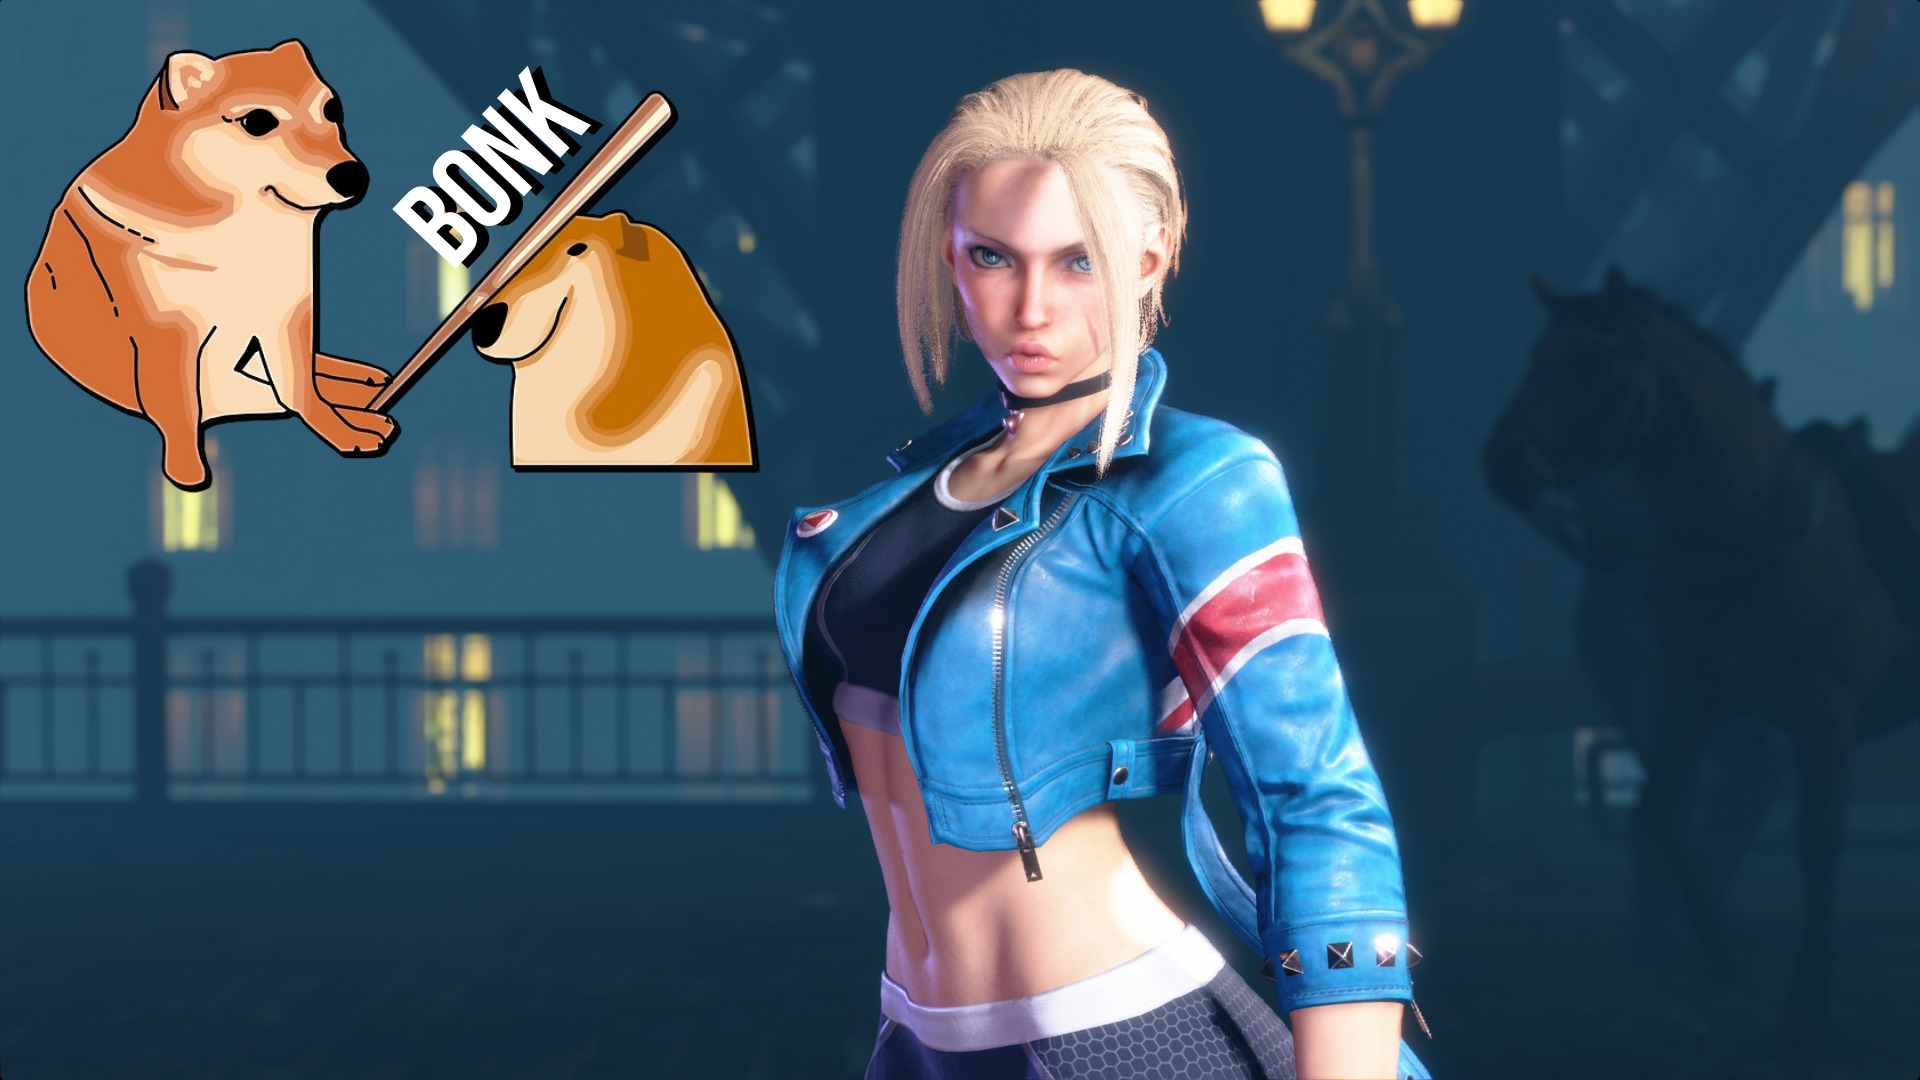 Cammy is back in Street Fighter 6 and the internet already cannot